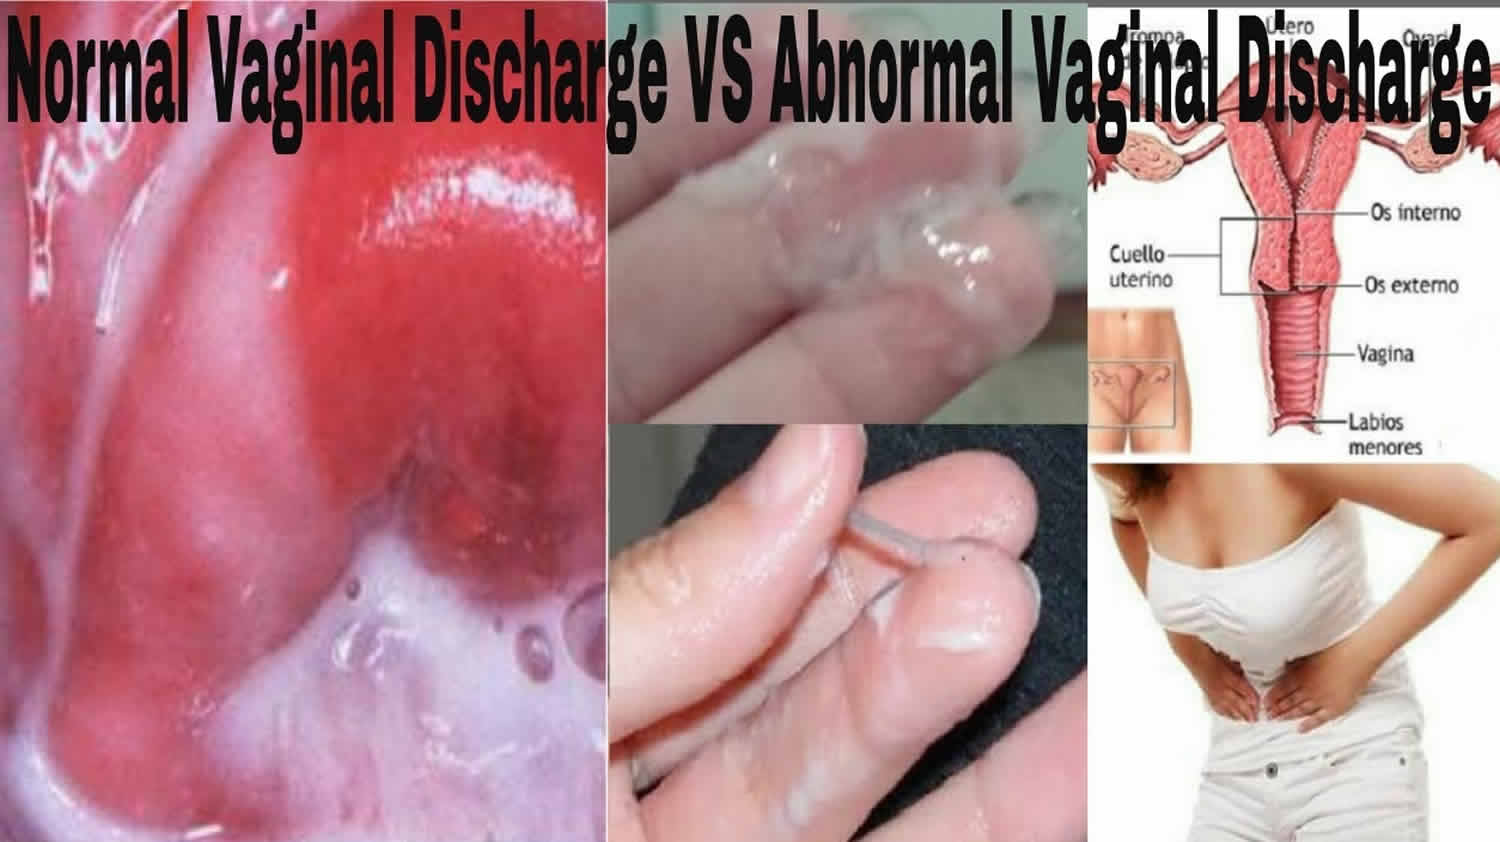 Types of vaginal discharge